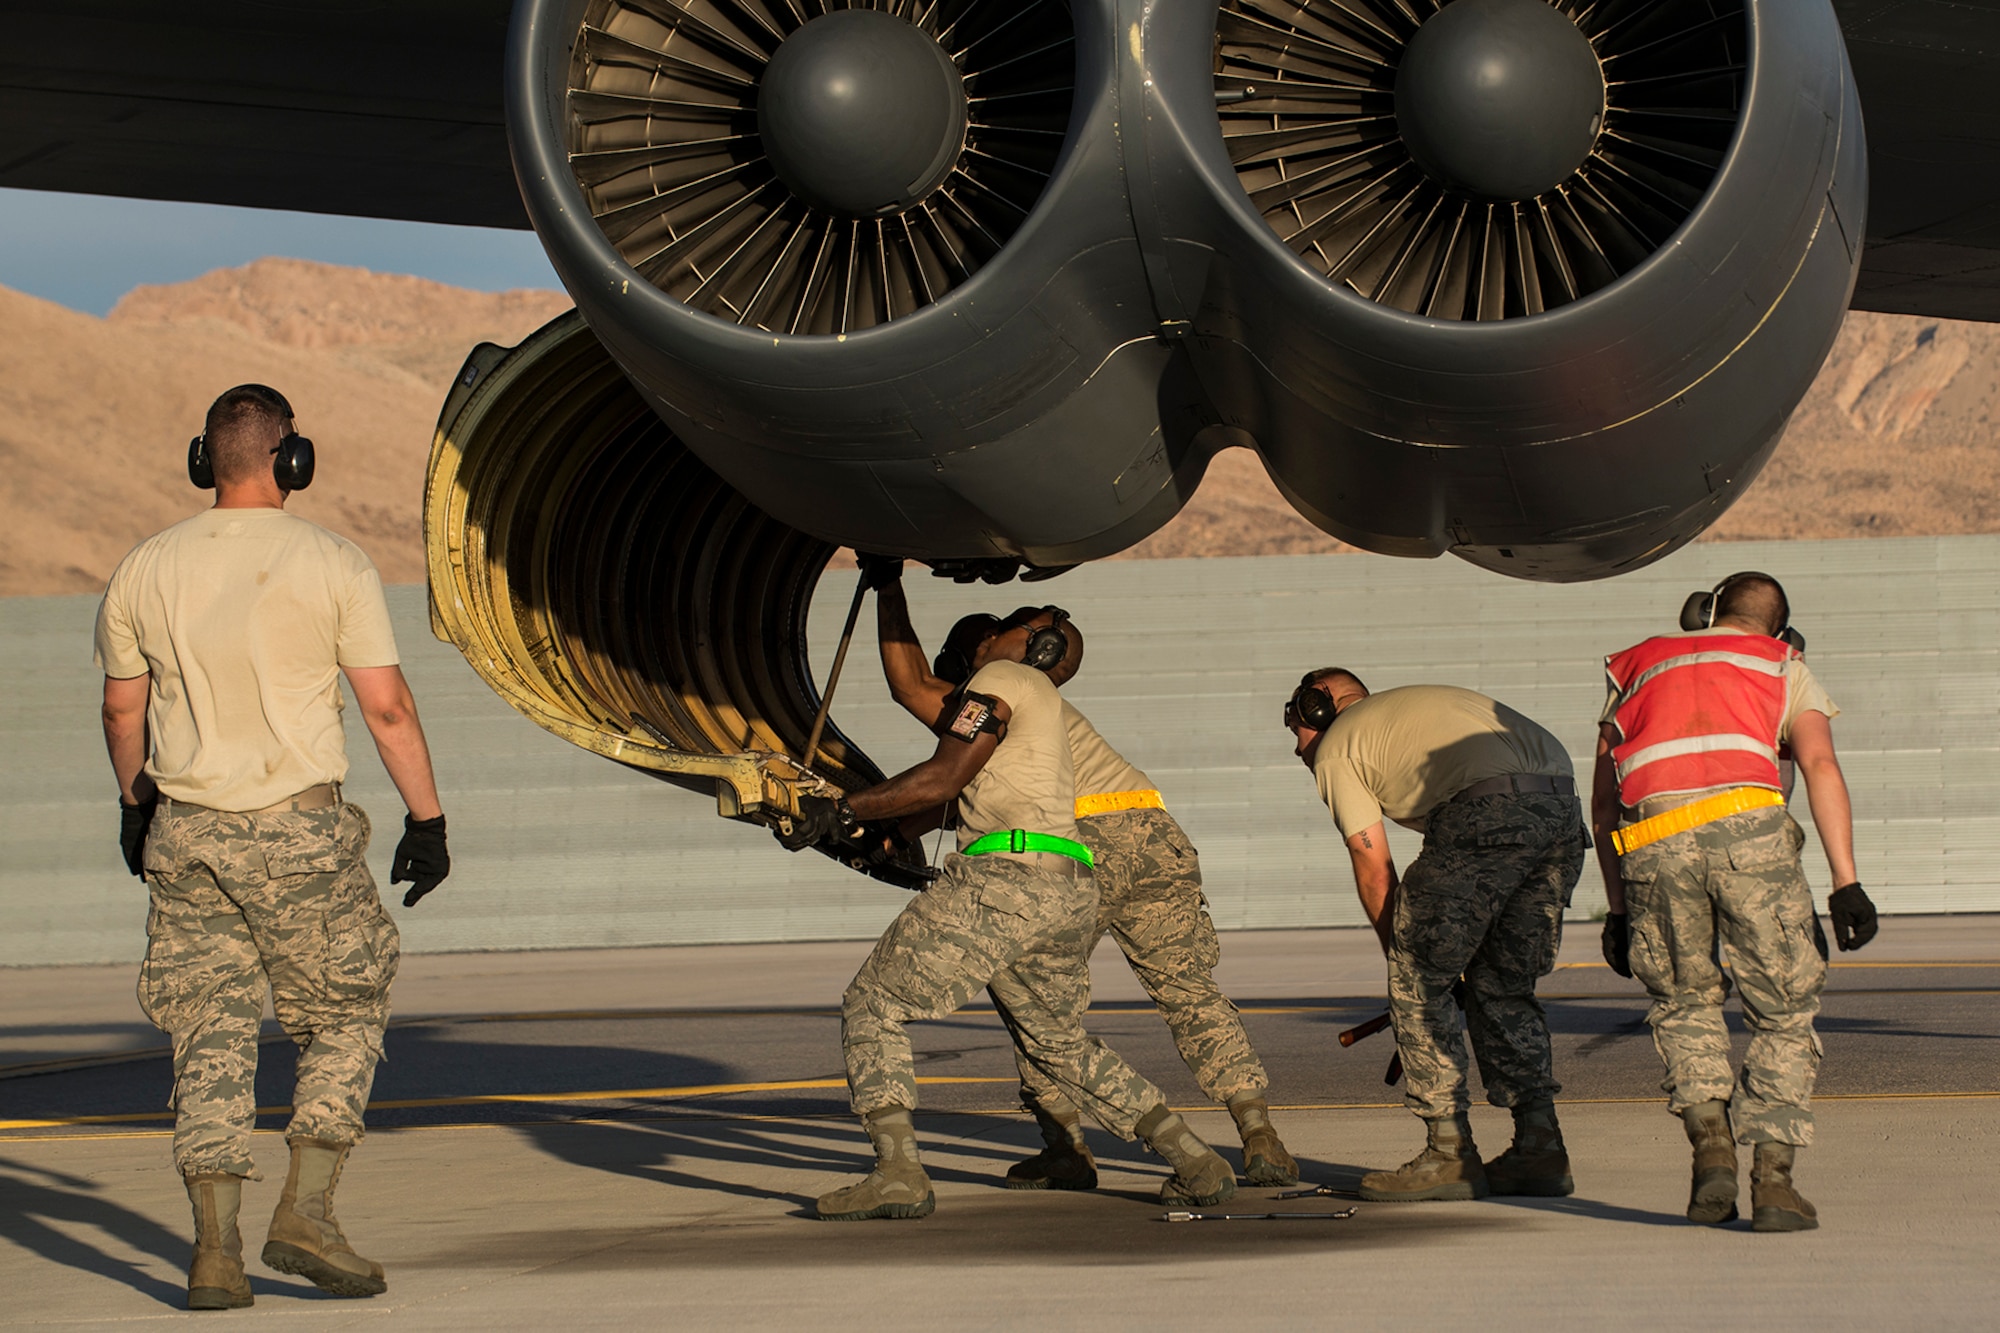 A group of U.S. Air Force Airmen work together to close an engine cowling on a B-52H Stratofortress prior to a mission on June 8, 2016, Nellis Air Force Base, Nev. The Airmen are among 45 Active Duty and Air Force Reserve maintenance personnel on temporary duty at Nellis in support of the 340th Weapons Squadron. (U.S. Air Force photo by Master Sgt. Greg Steele/Released)